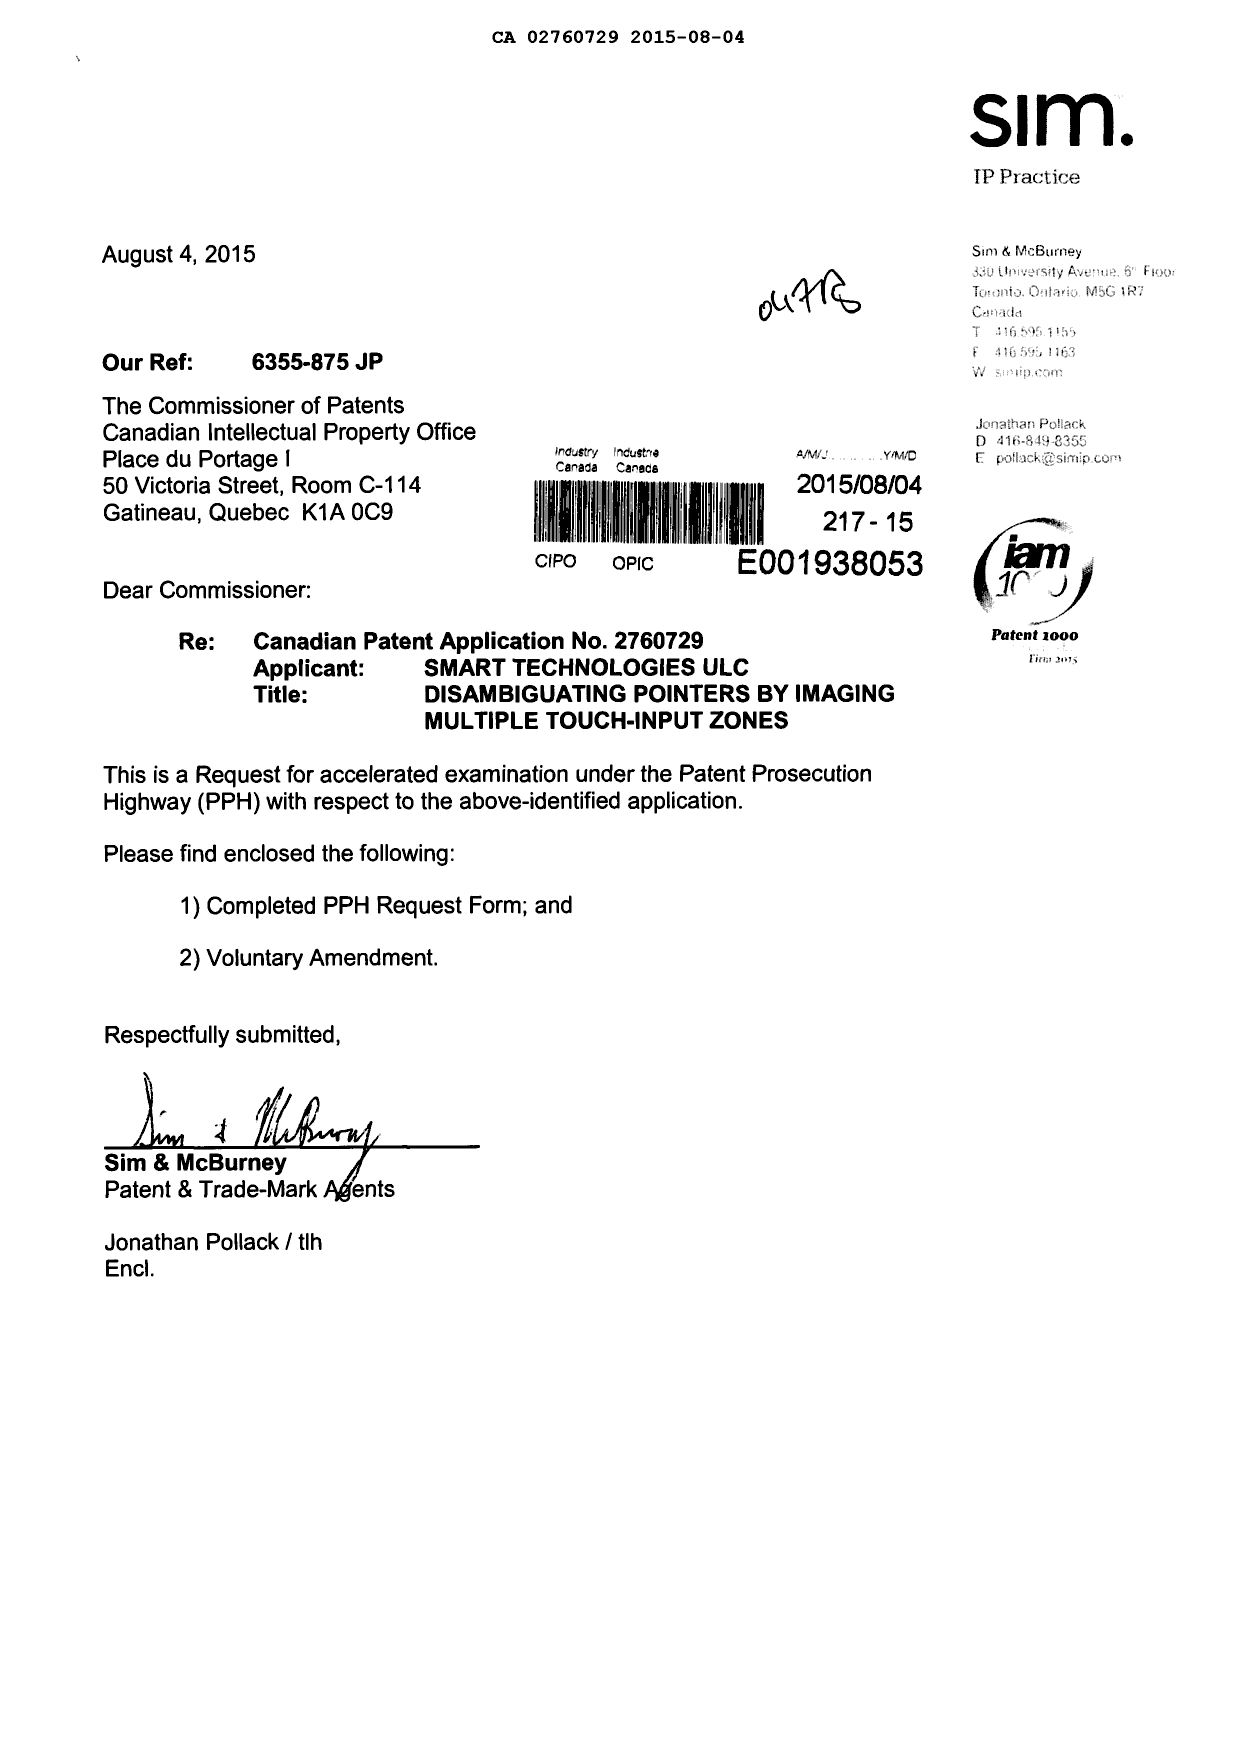 Canadian Patent Document 2760729. PPH Request 20150804. Image 1 of 15